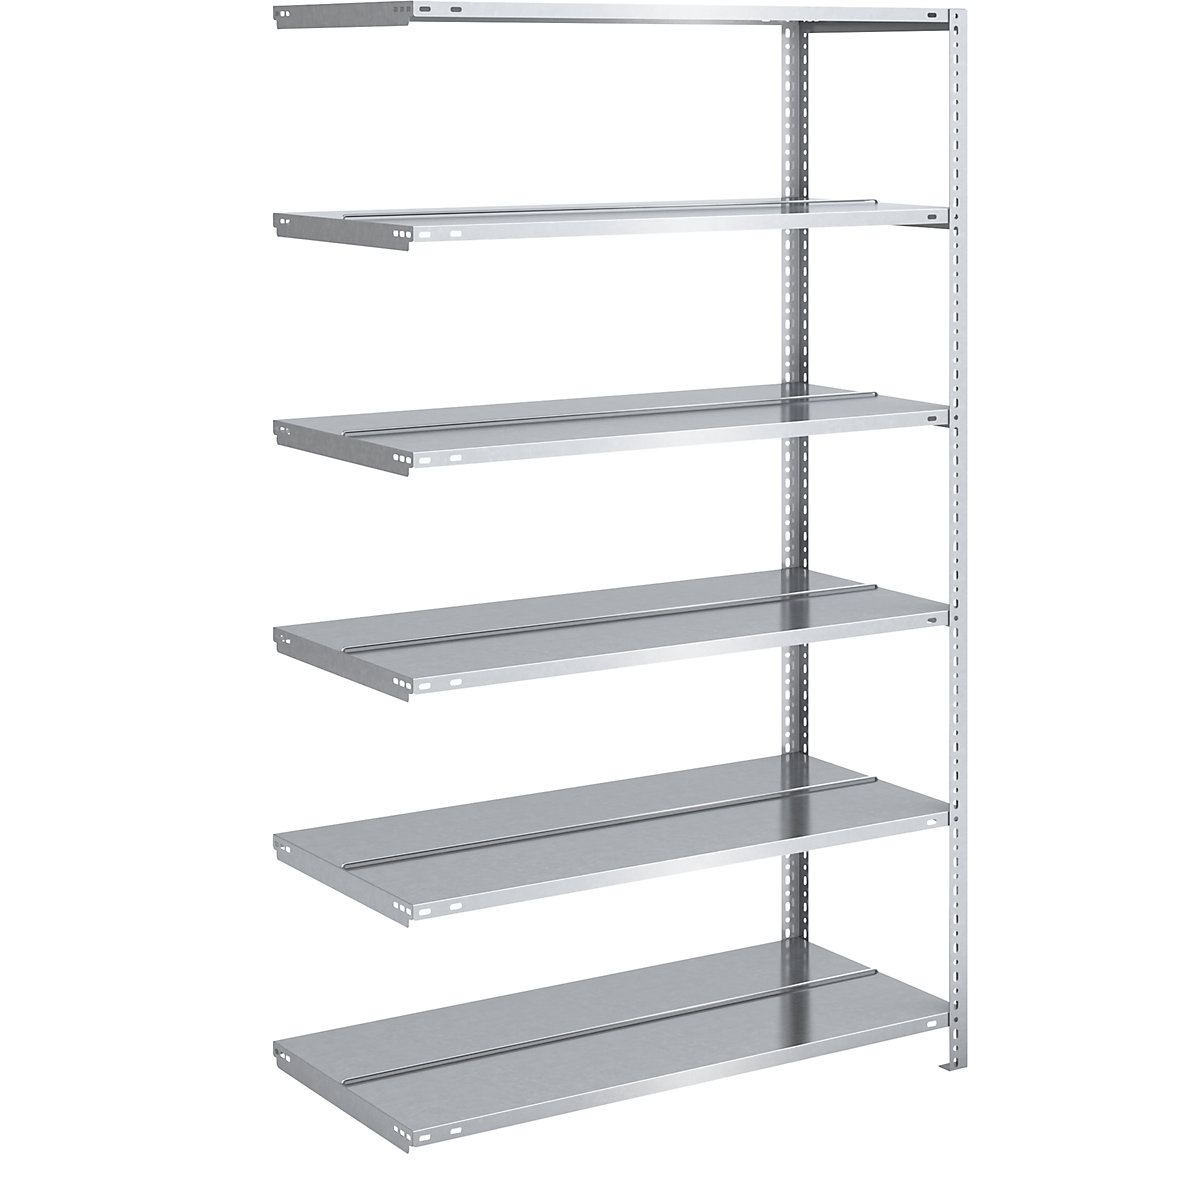 Bolt-together archive shelving, zinc plated – hofe, shelf height 1850 mm, double sided, extension shelf, width x depth 1000 x 600 mm-4